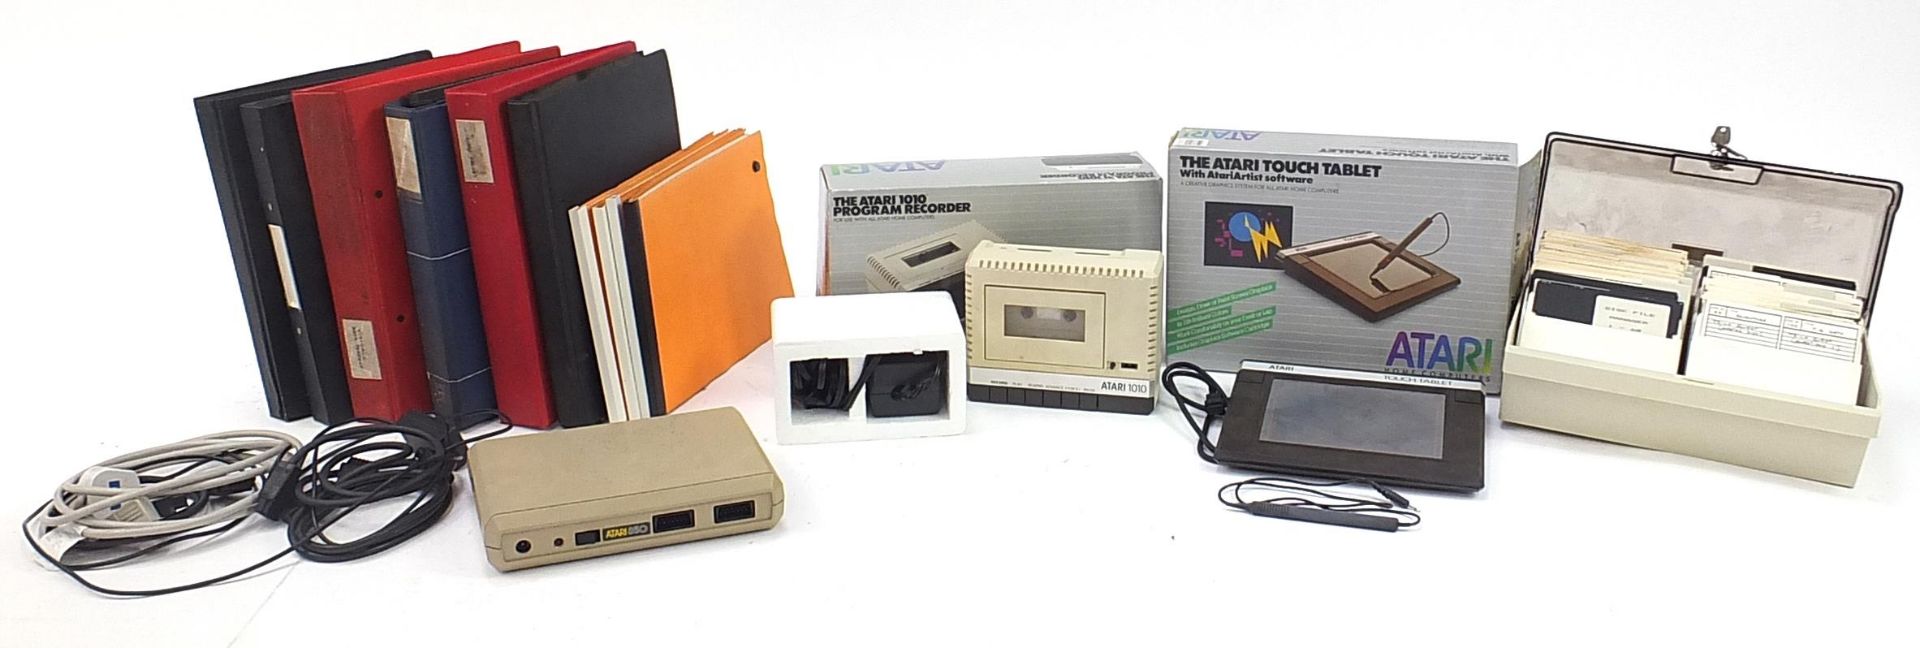 Atari computer accessories, discs and manuals including 1010 programme recorder and touch tablet